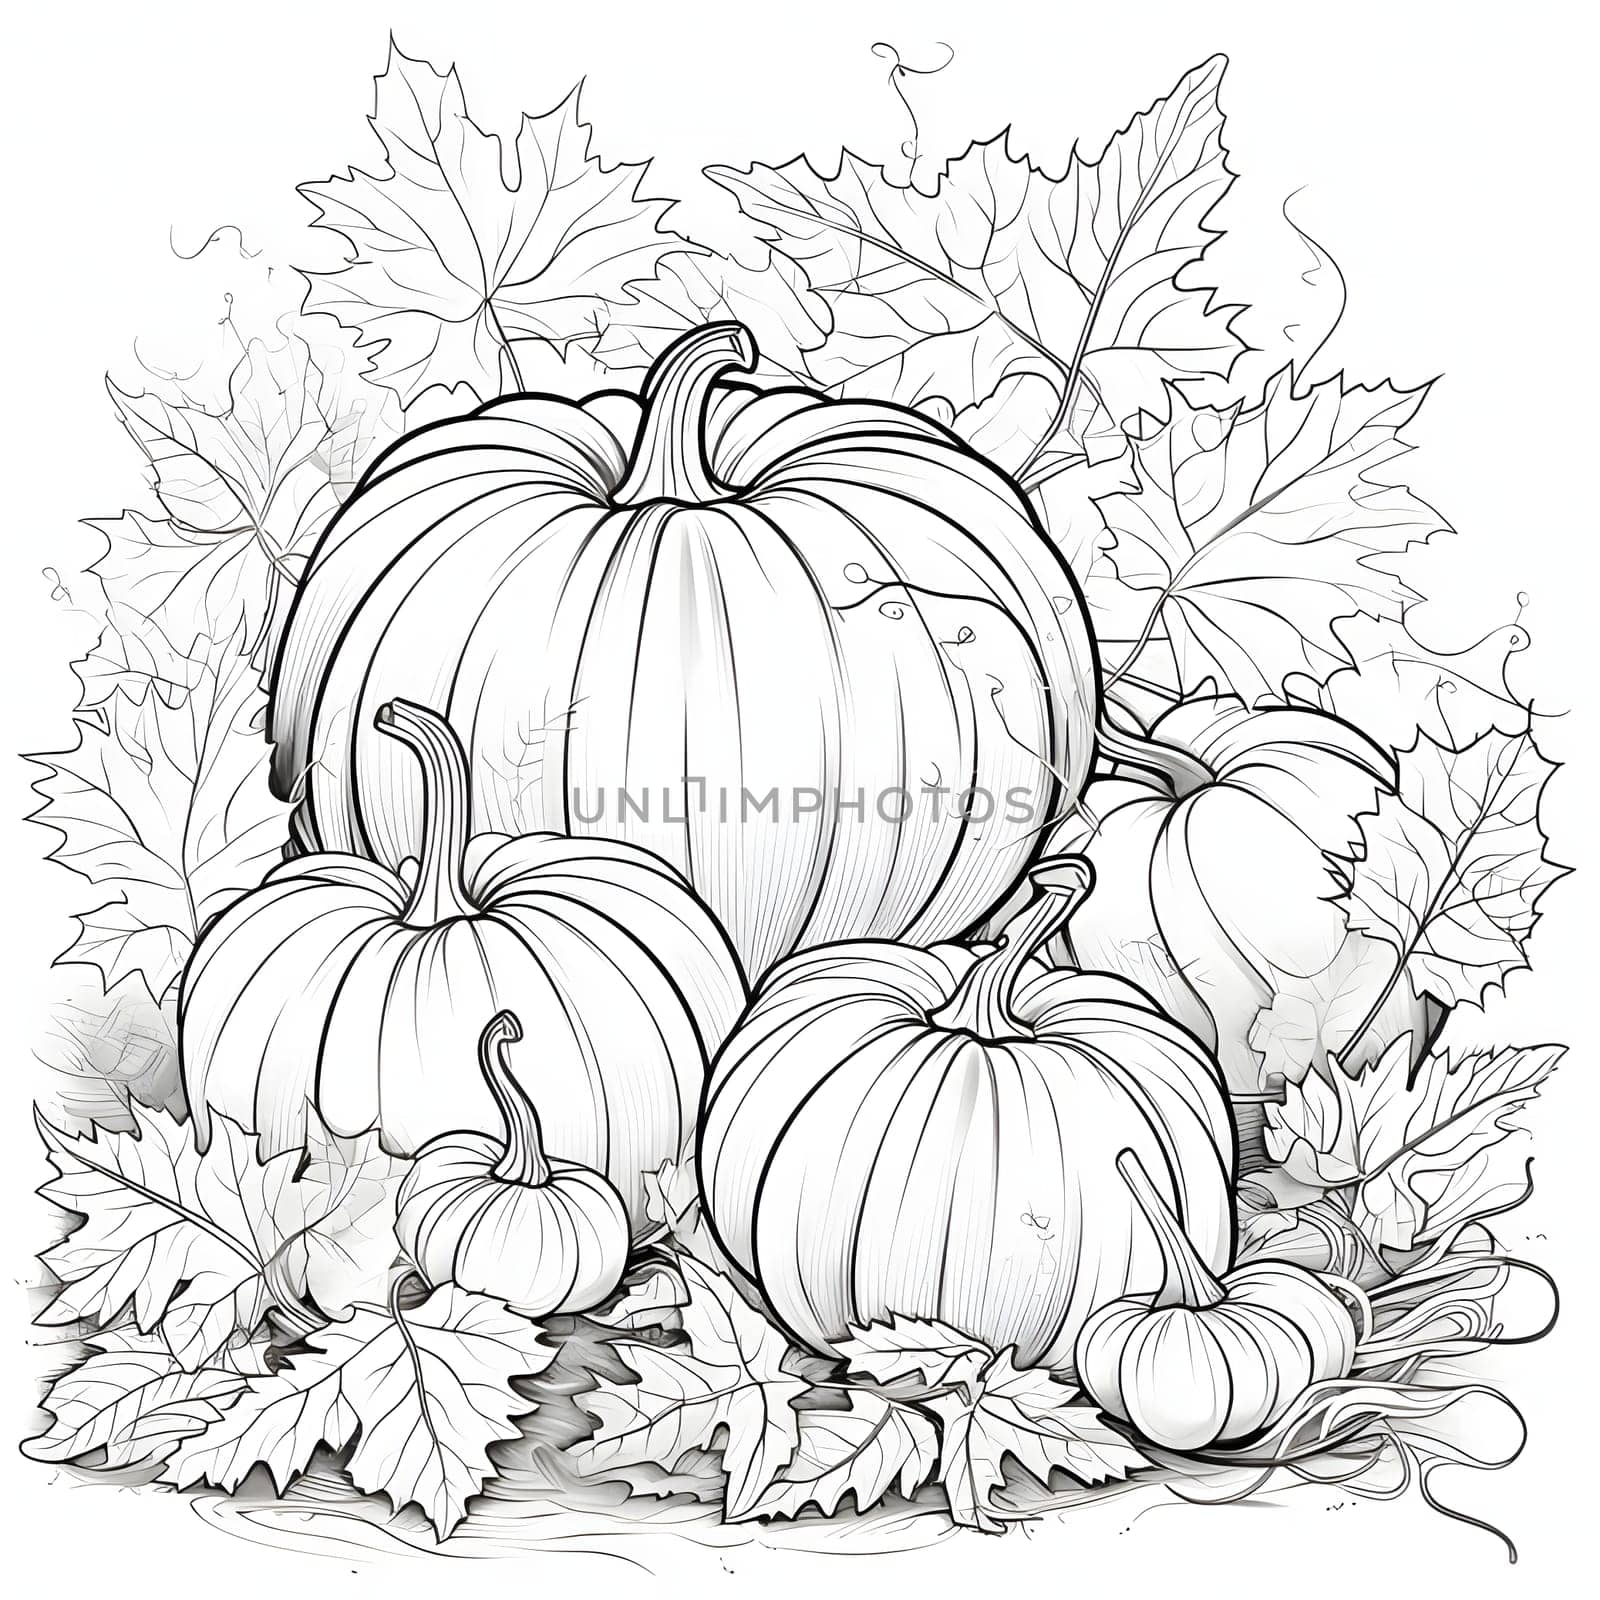 Pumpkins and leaves black and white coloring book. Pumpkin as a dish of thanksgiving for the harvest, picture on a white isolated background. by ThemesS